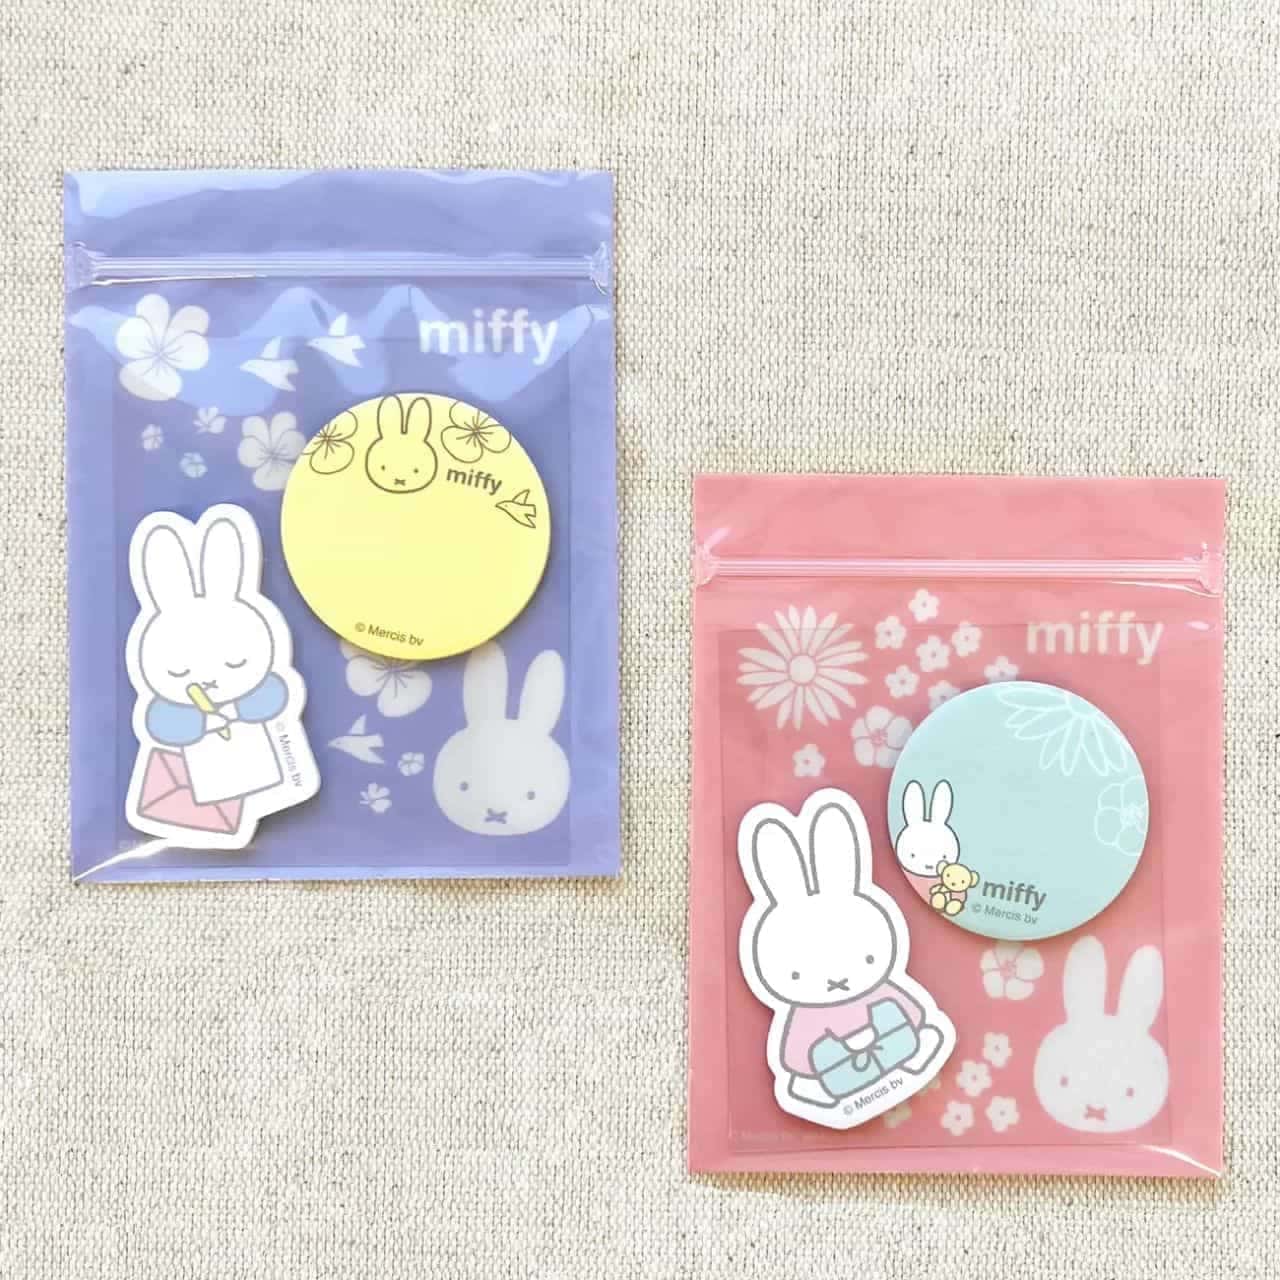 Post Office "Miffy: Stationery to Carry Your Thoughts